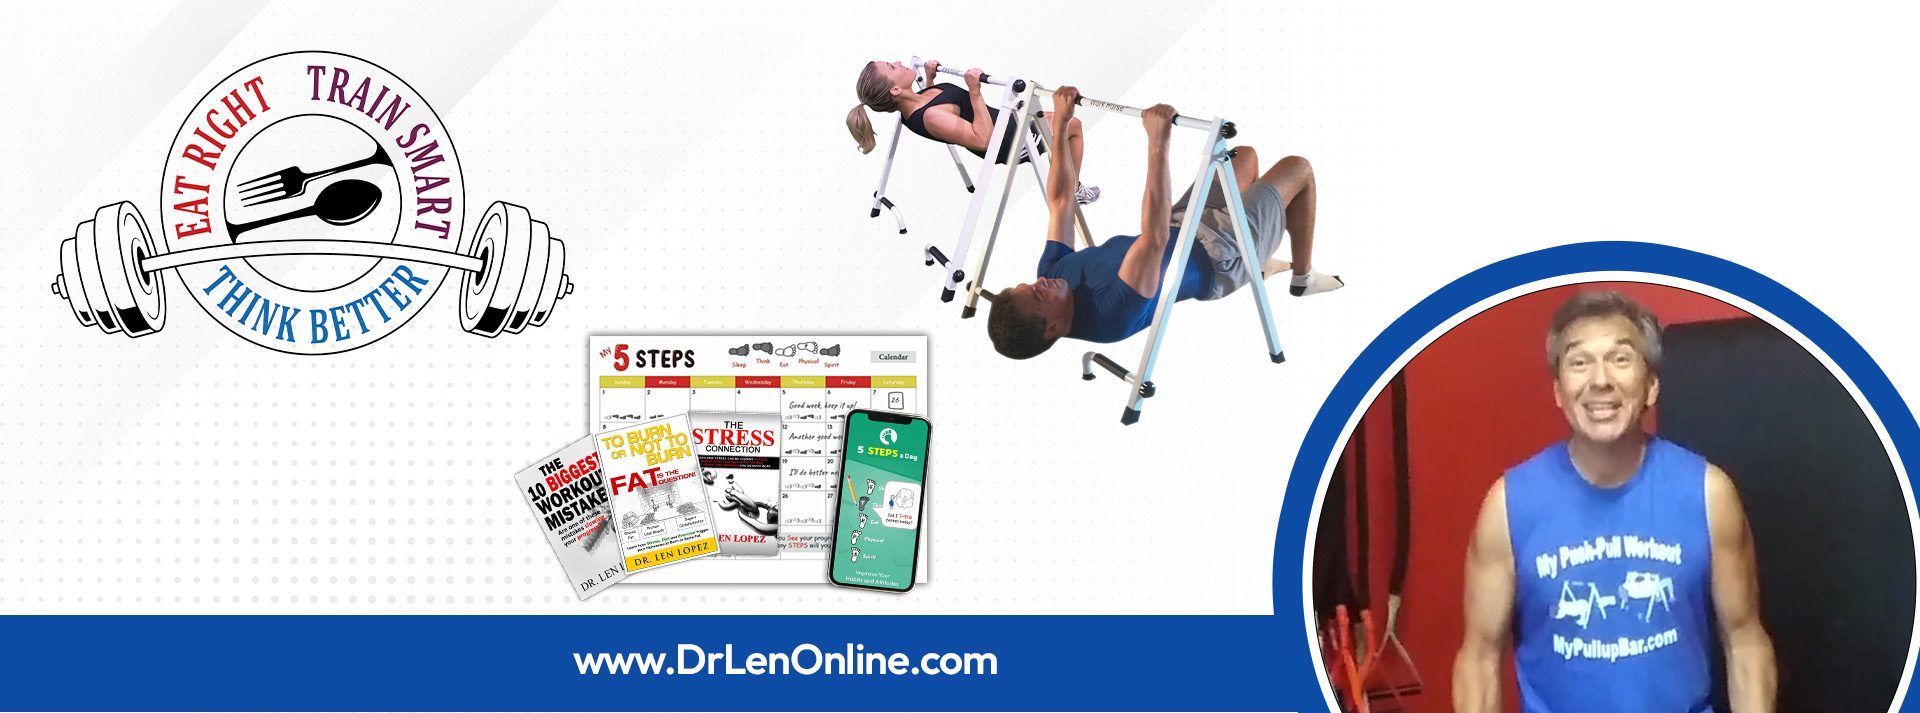 Eat Right, Train Smart, Think Better with Dr. Len online